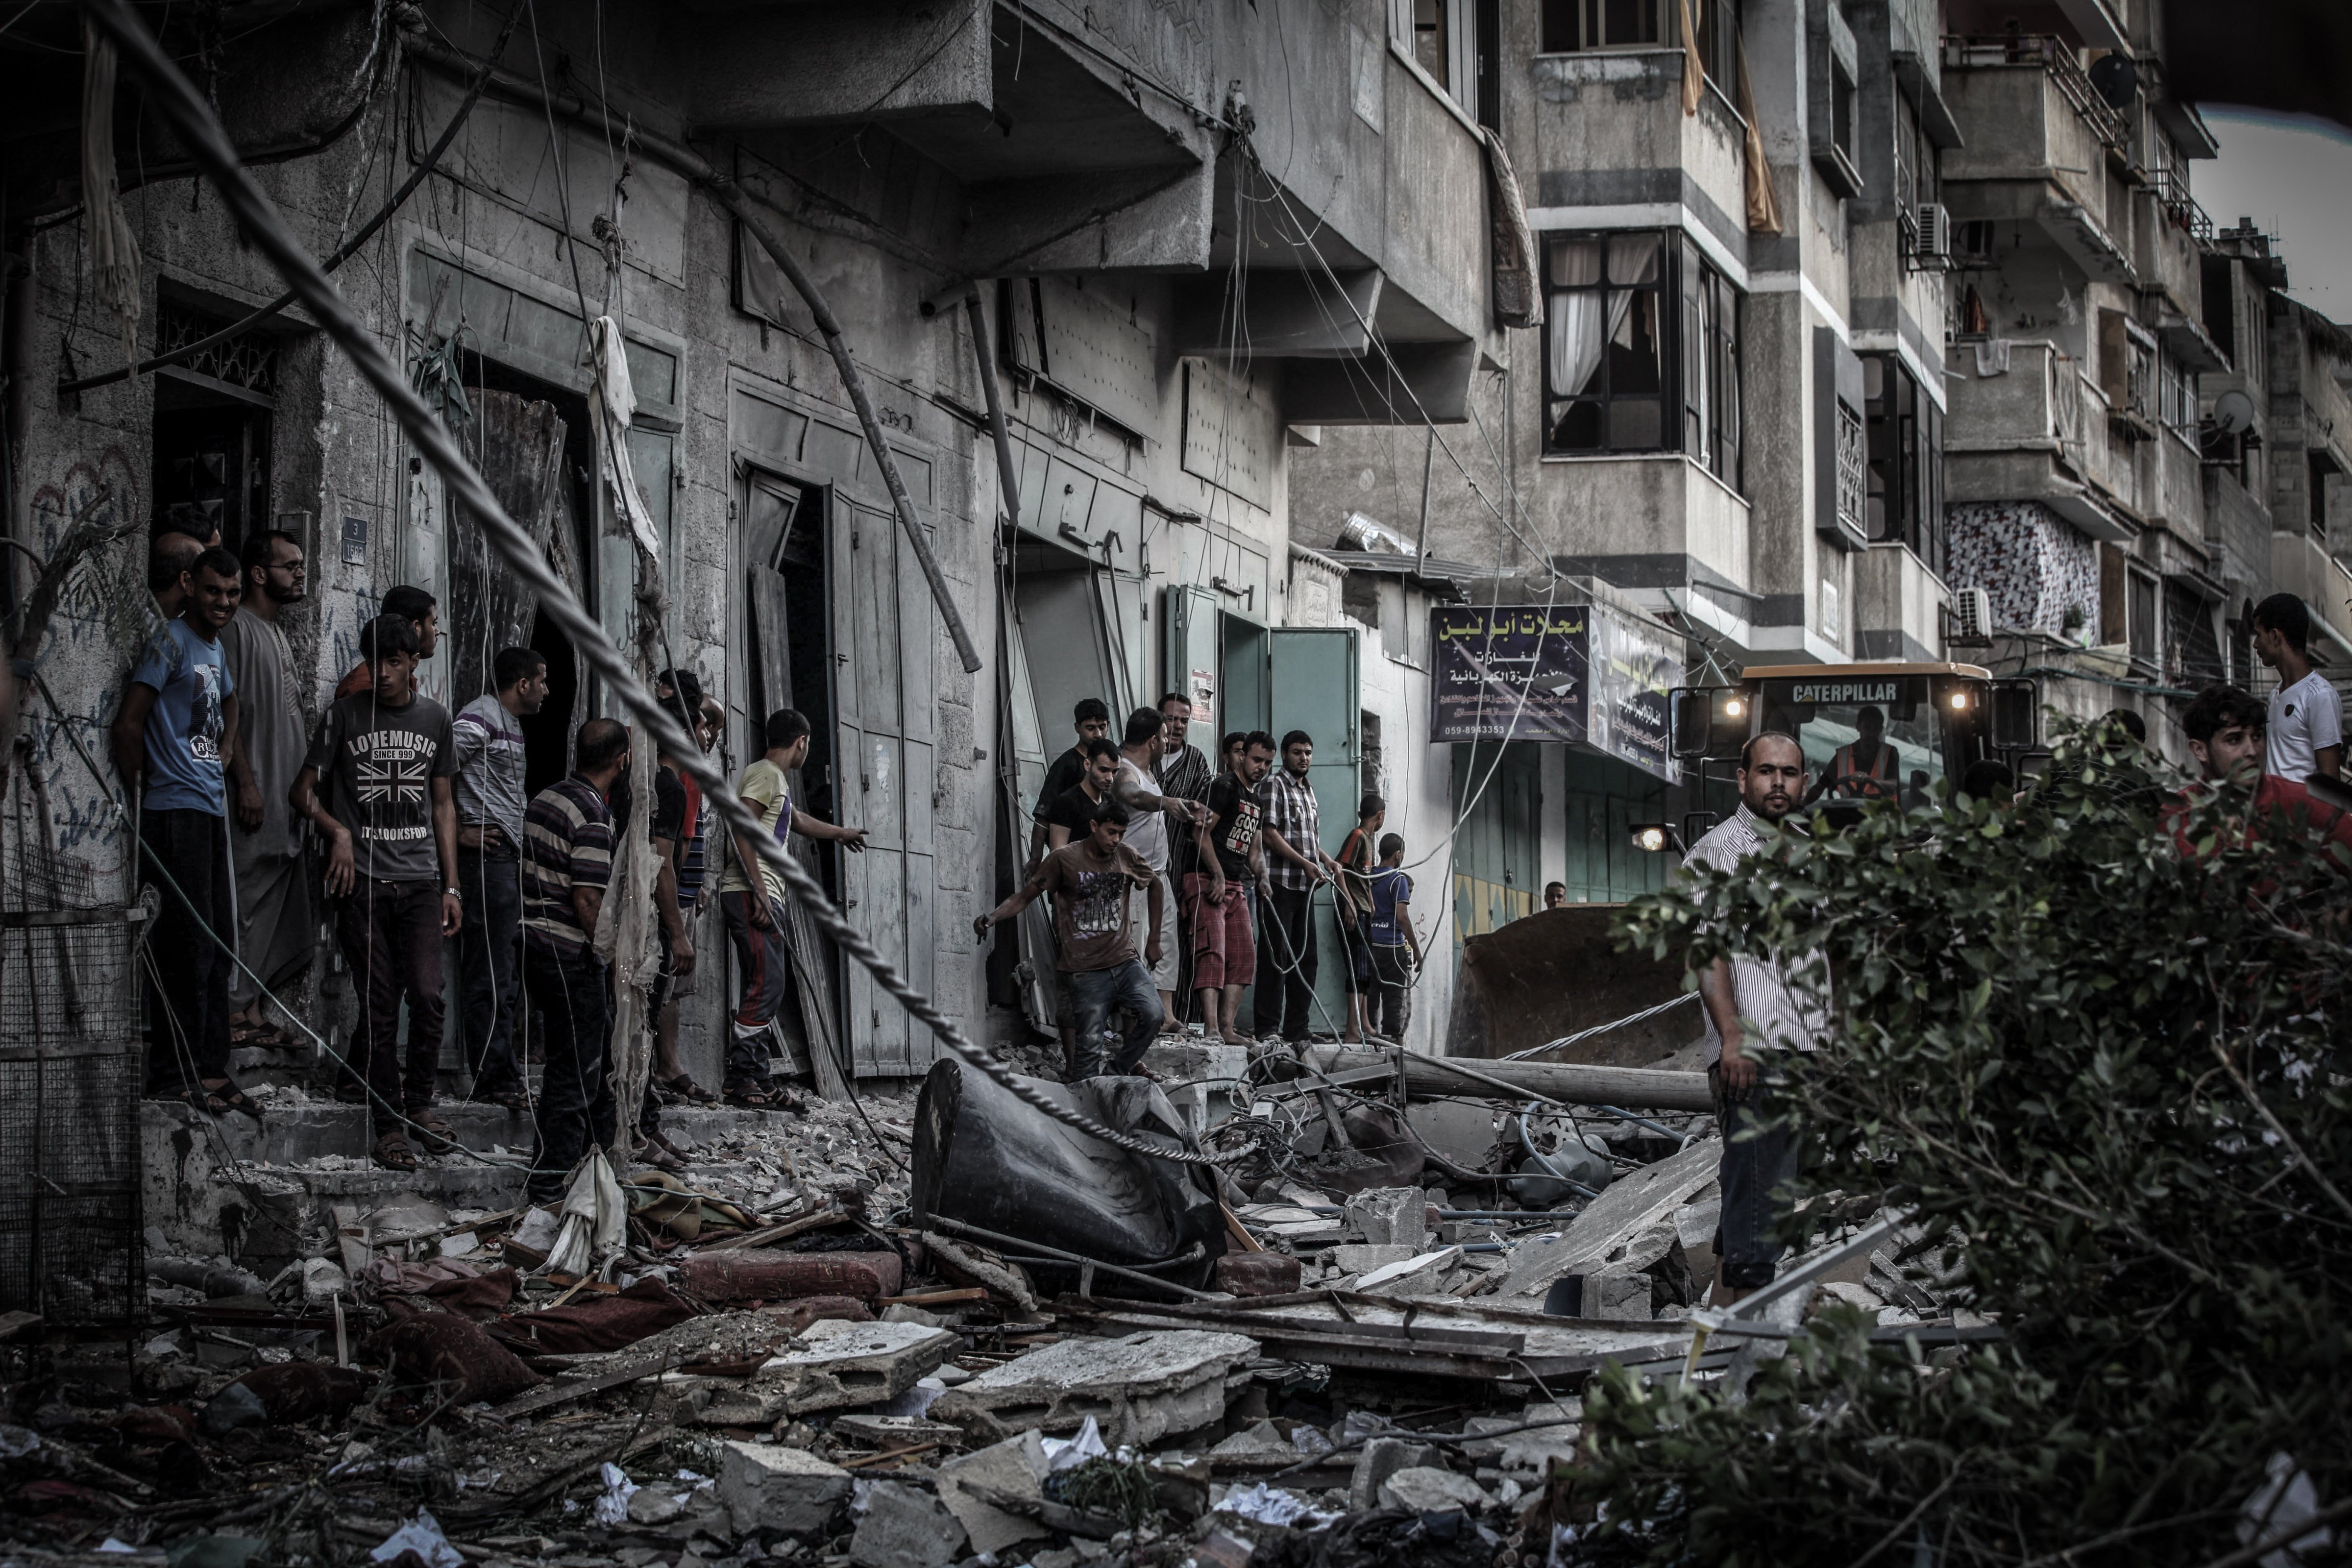 Palestinians inspect damage of an apartment building after it was hit by an Israeli missile strike in Gaza City, Friday, July 18, 2014. (Momen Faiz—NurPhoto/Corbis)